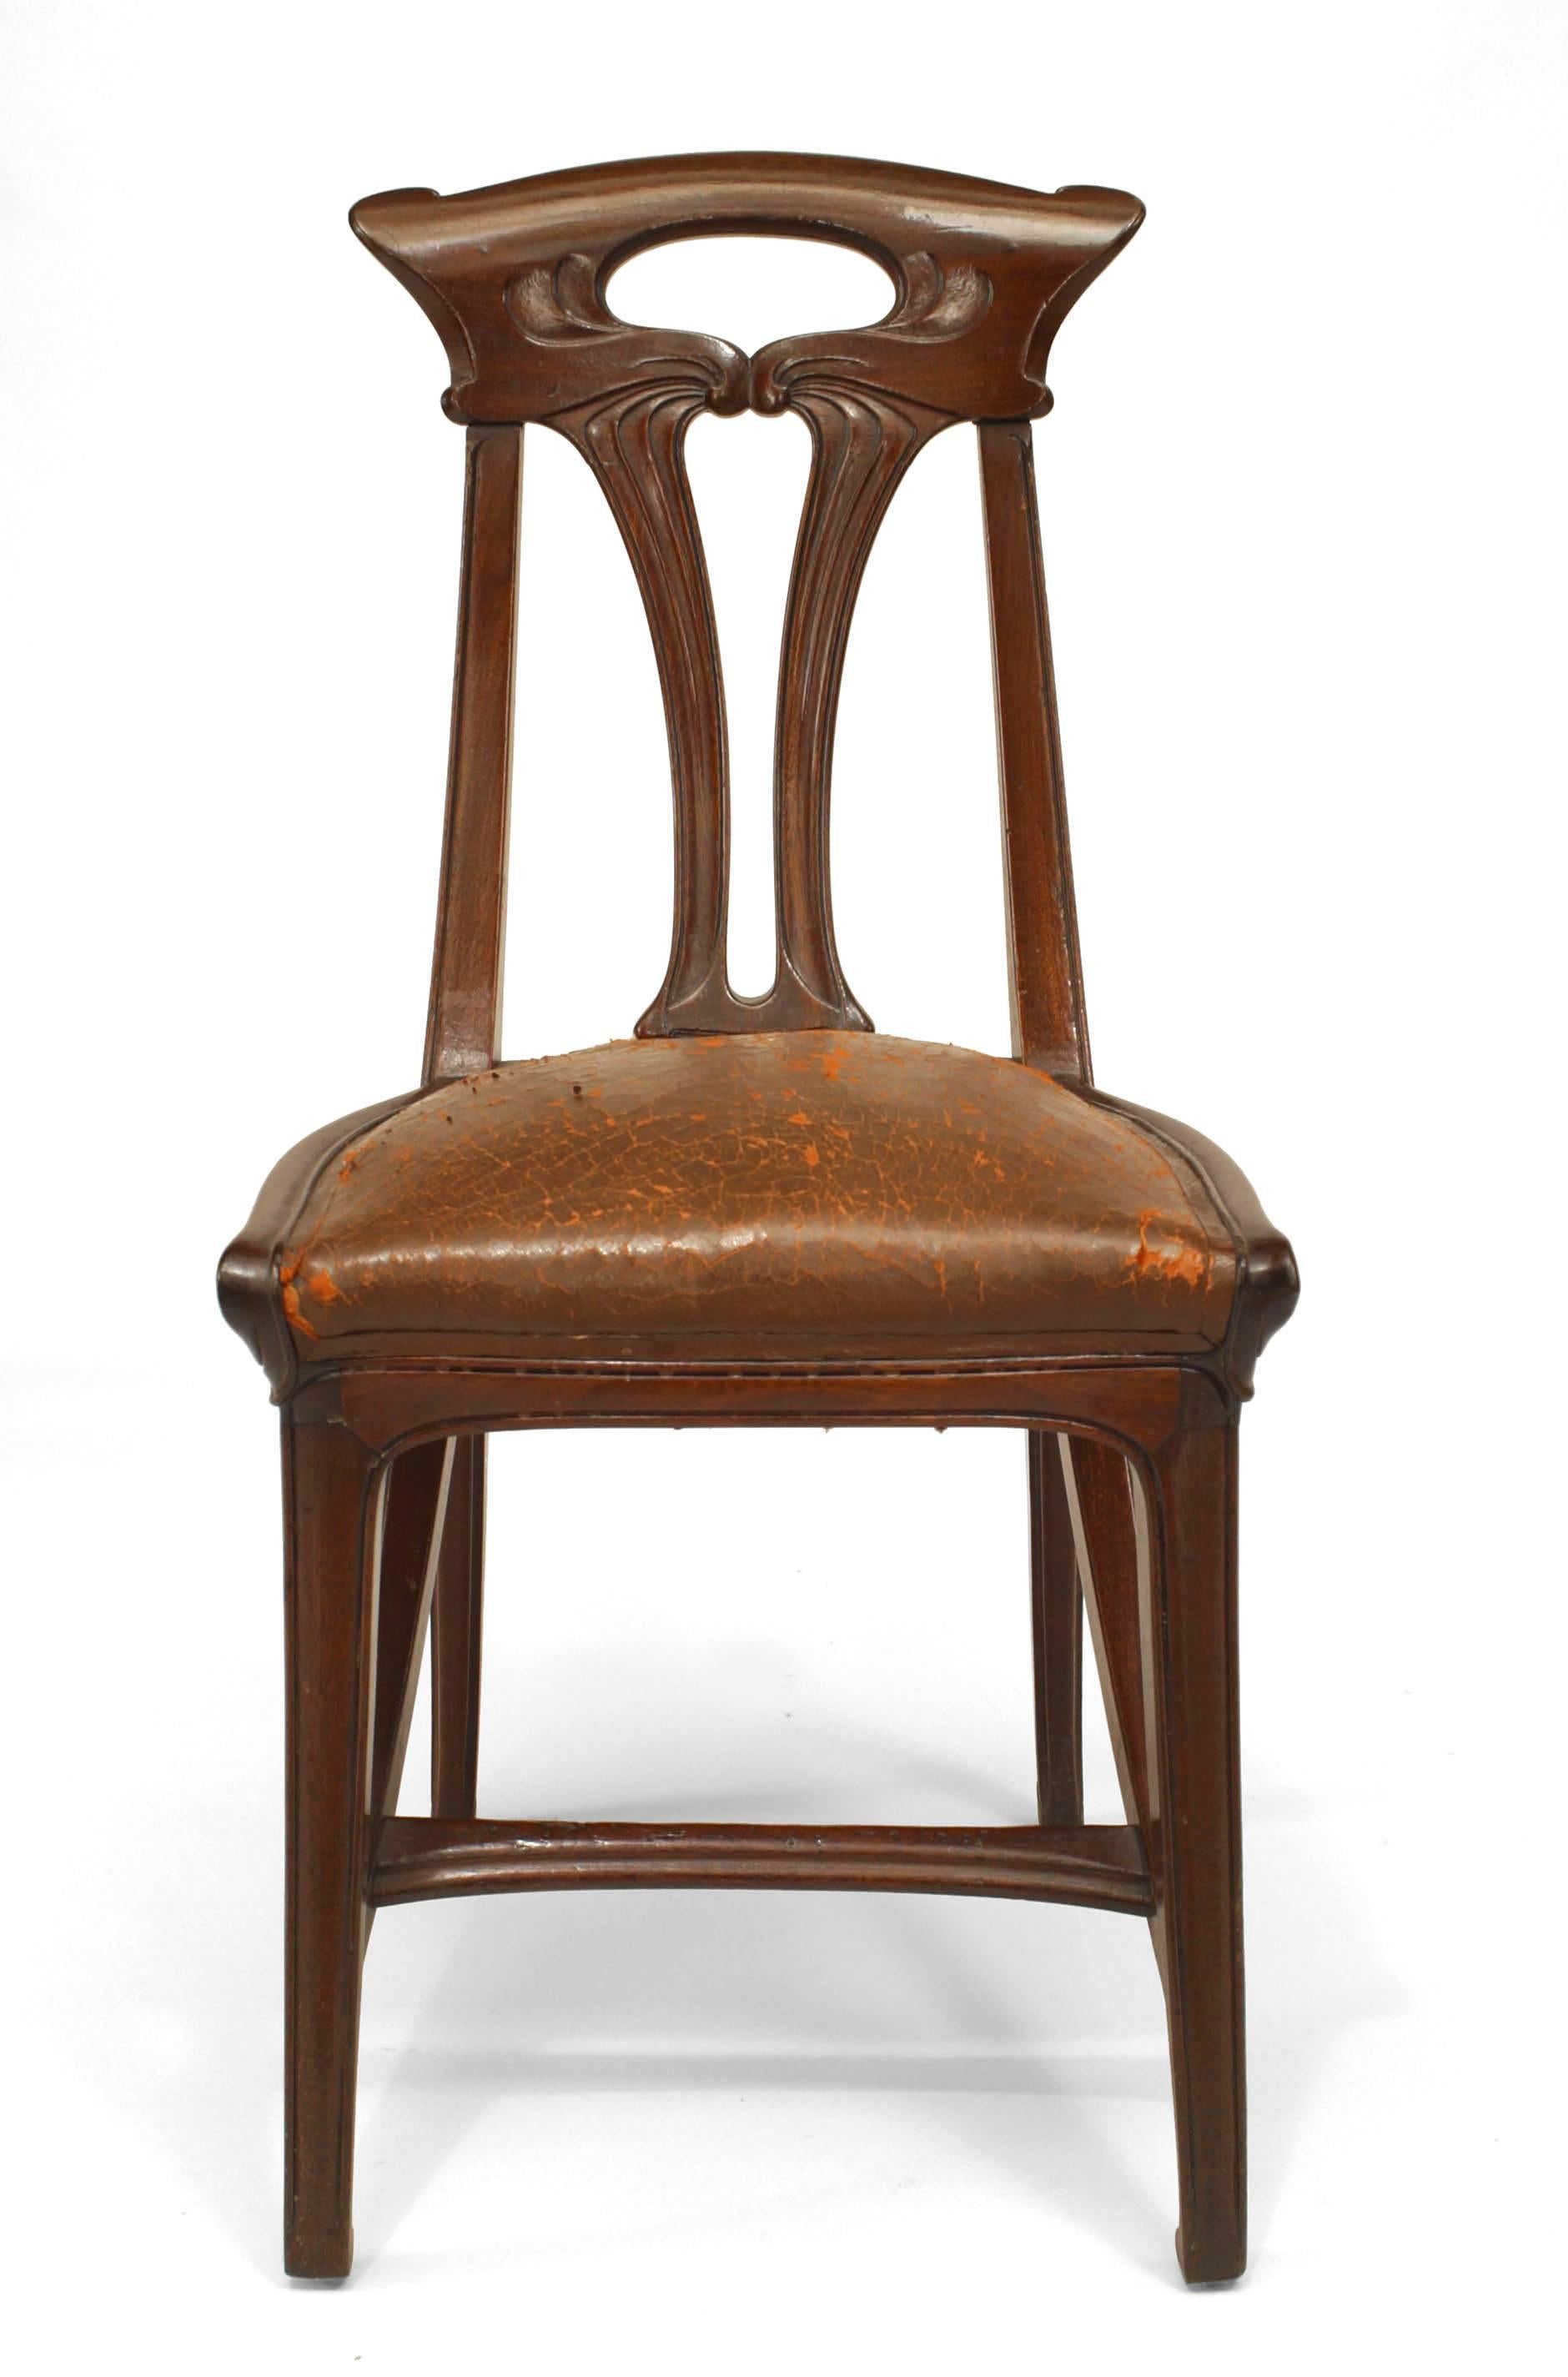 Pair of French Art Nouveau walnut sleigh design open back side chairs with brown leather seat (GAILLARD) (pg. 386, Collectors Encyclopedia of Antiques) (matching table-Inv. #040557E)
